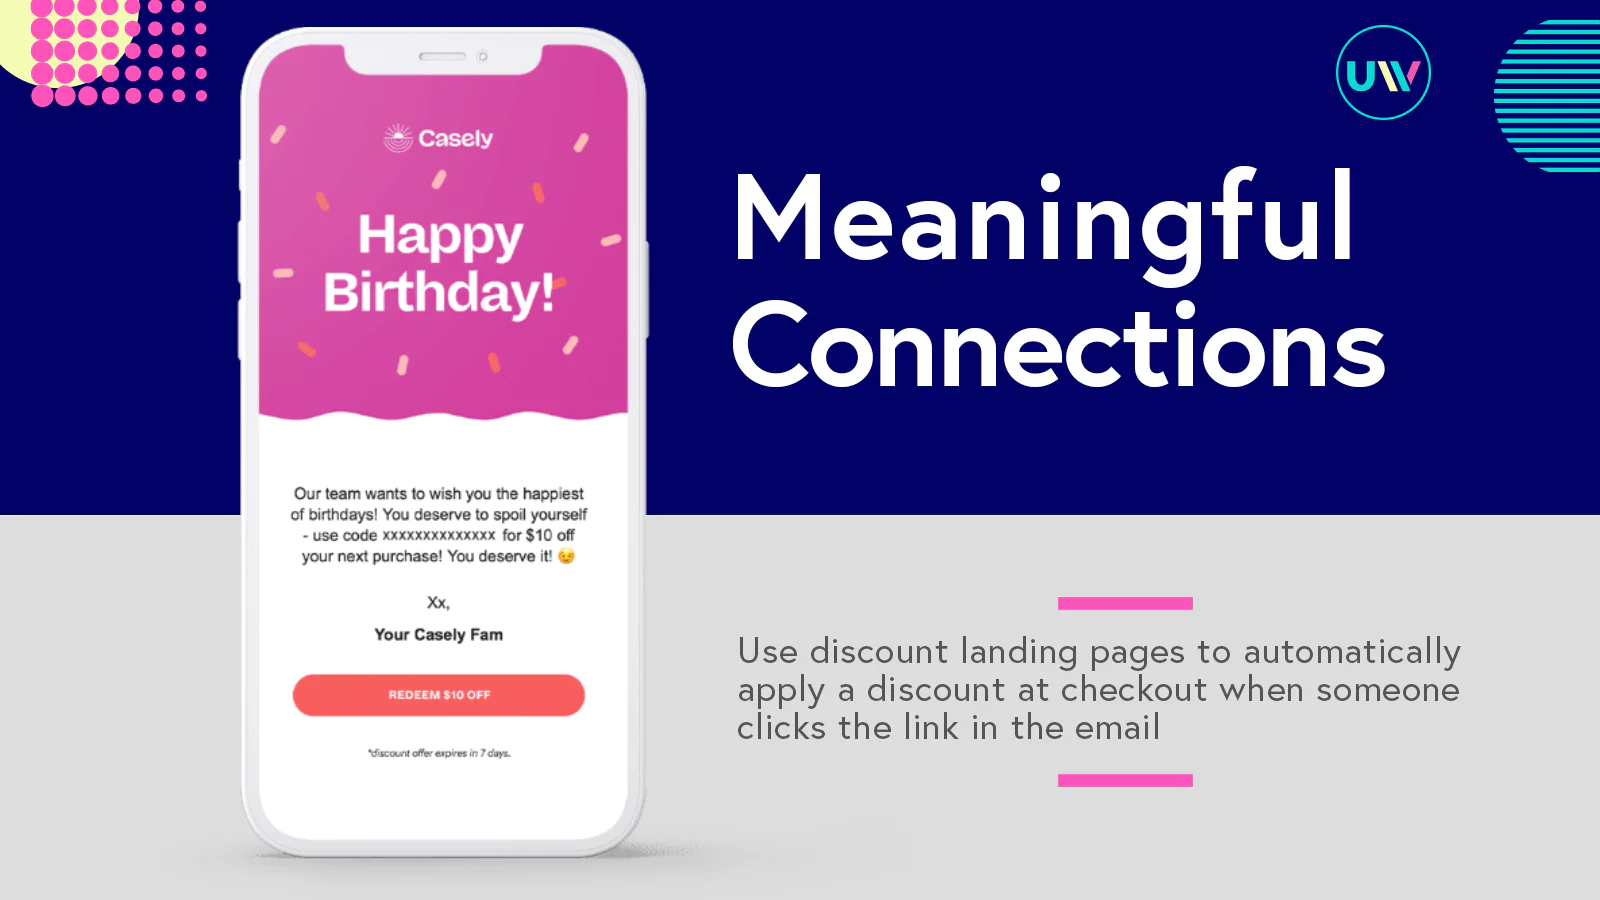 happy-birthday-meaningful-connections